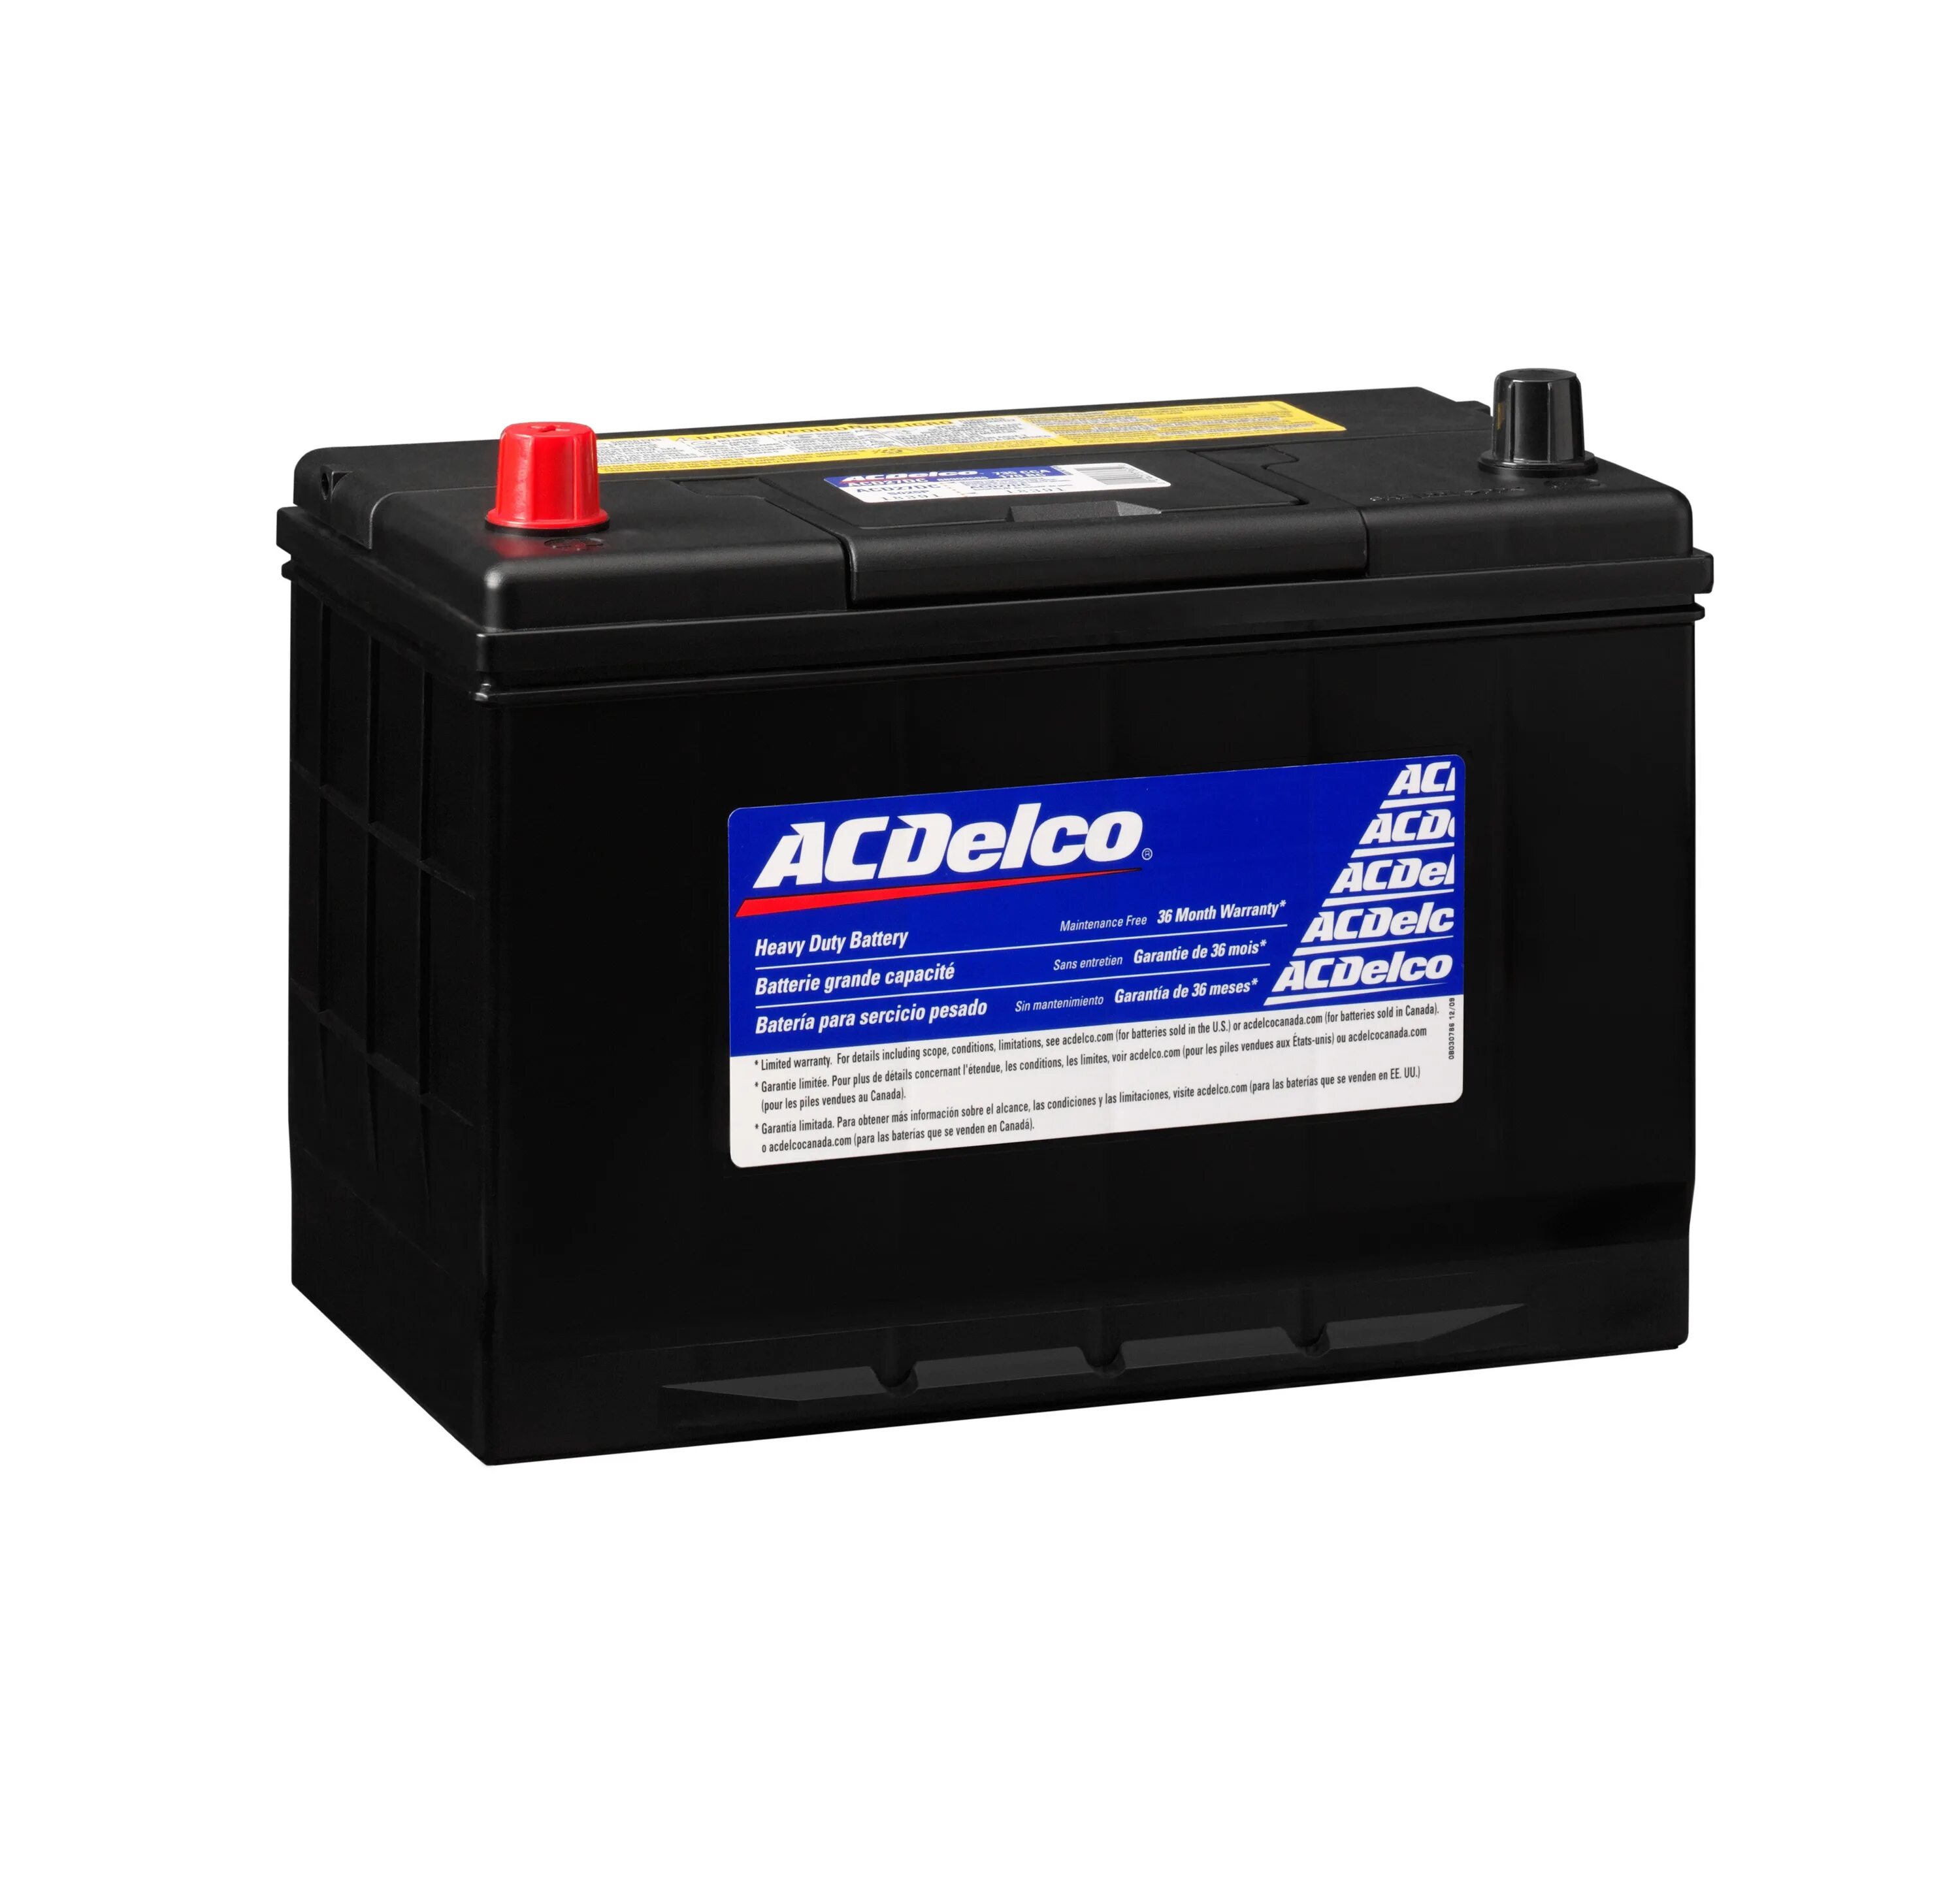 Ac battery. ACDELCO : 19375470 аккумуляторная батарея ACDELCO. Аккумулятор ACDELCO 2756. ACDELCO 19380000. ACDELCO 32, 340а.